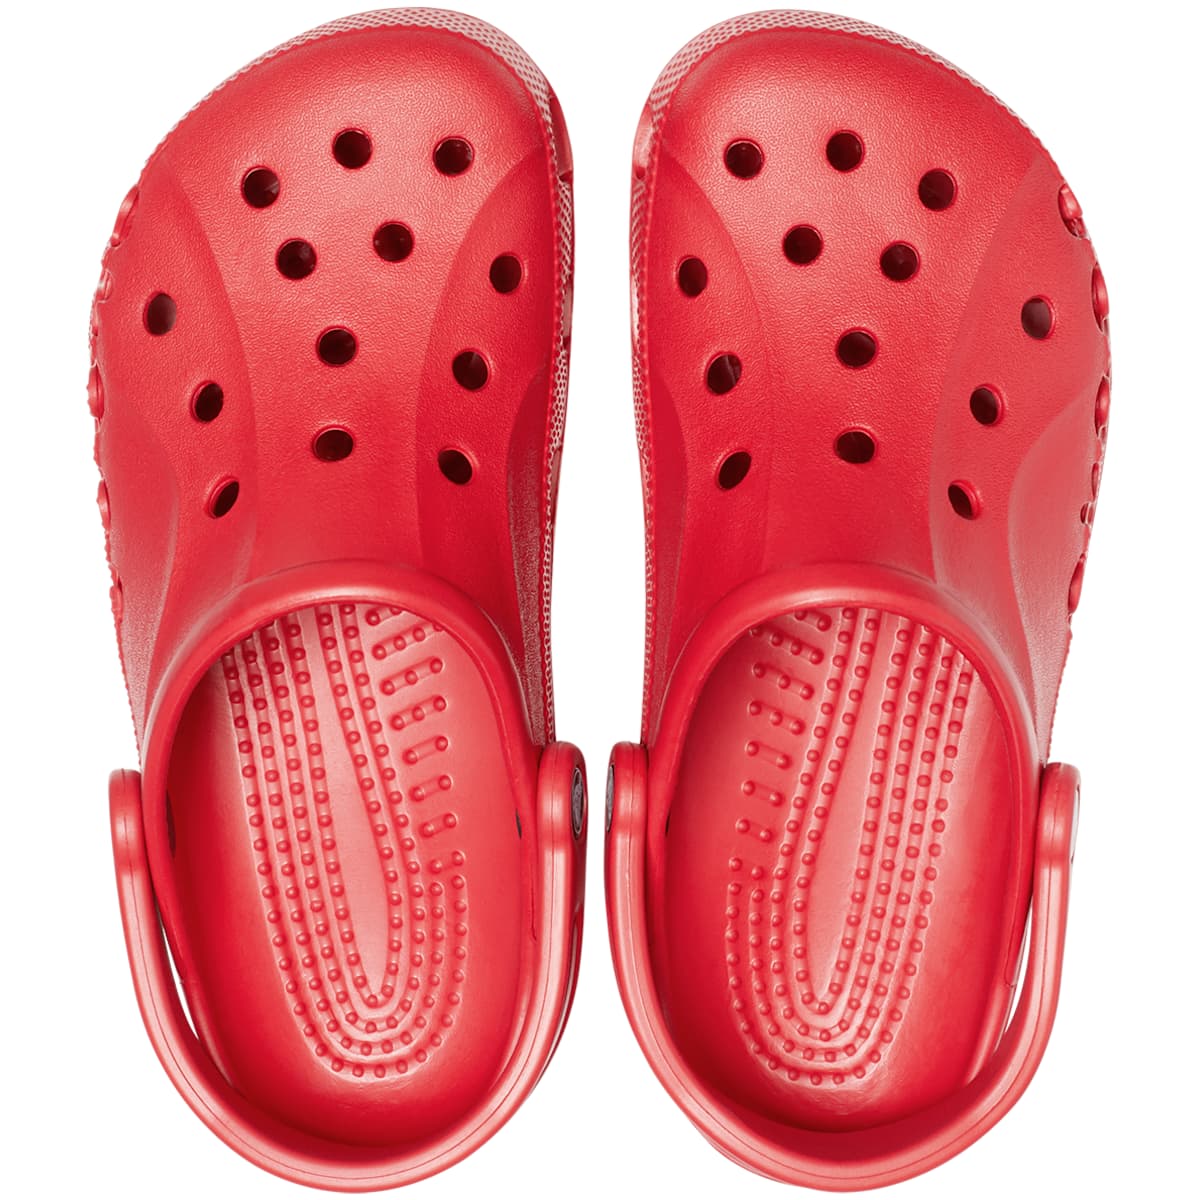 A pair of red slip-on, waterproof shoes with round perforations on the top.